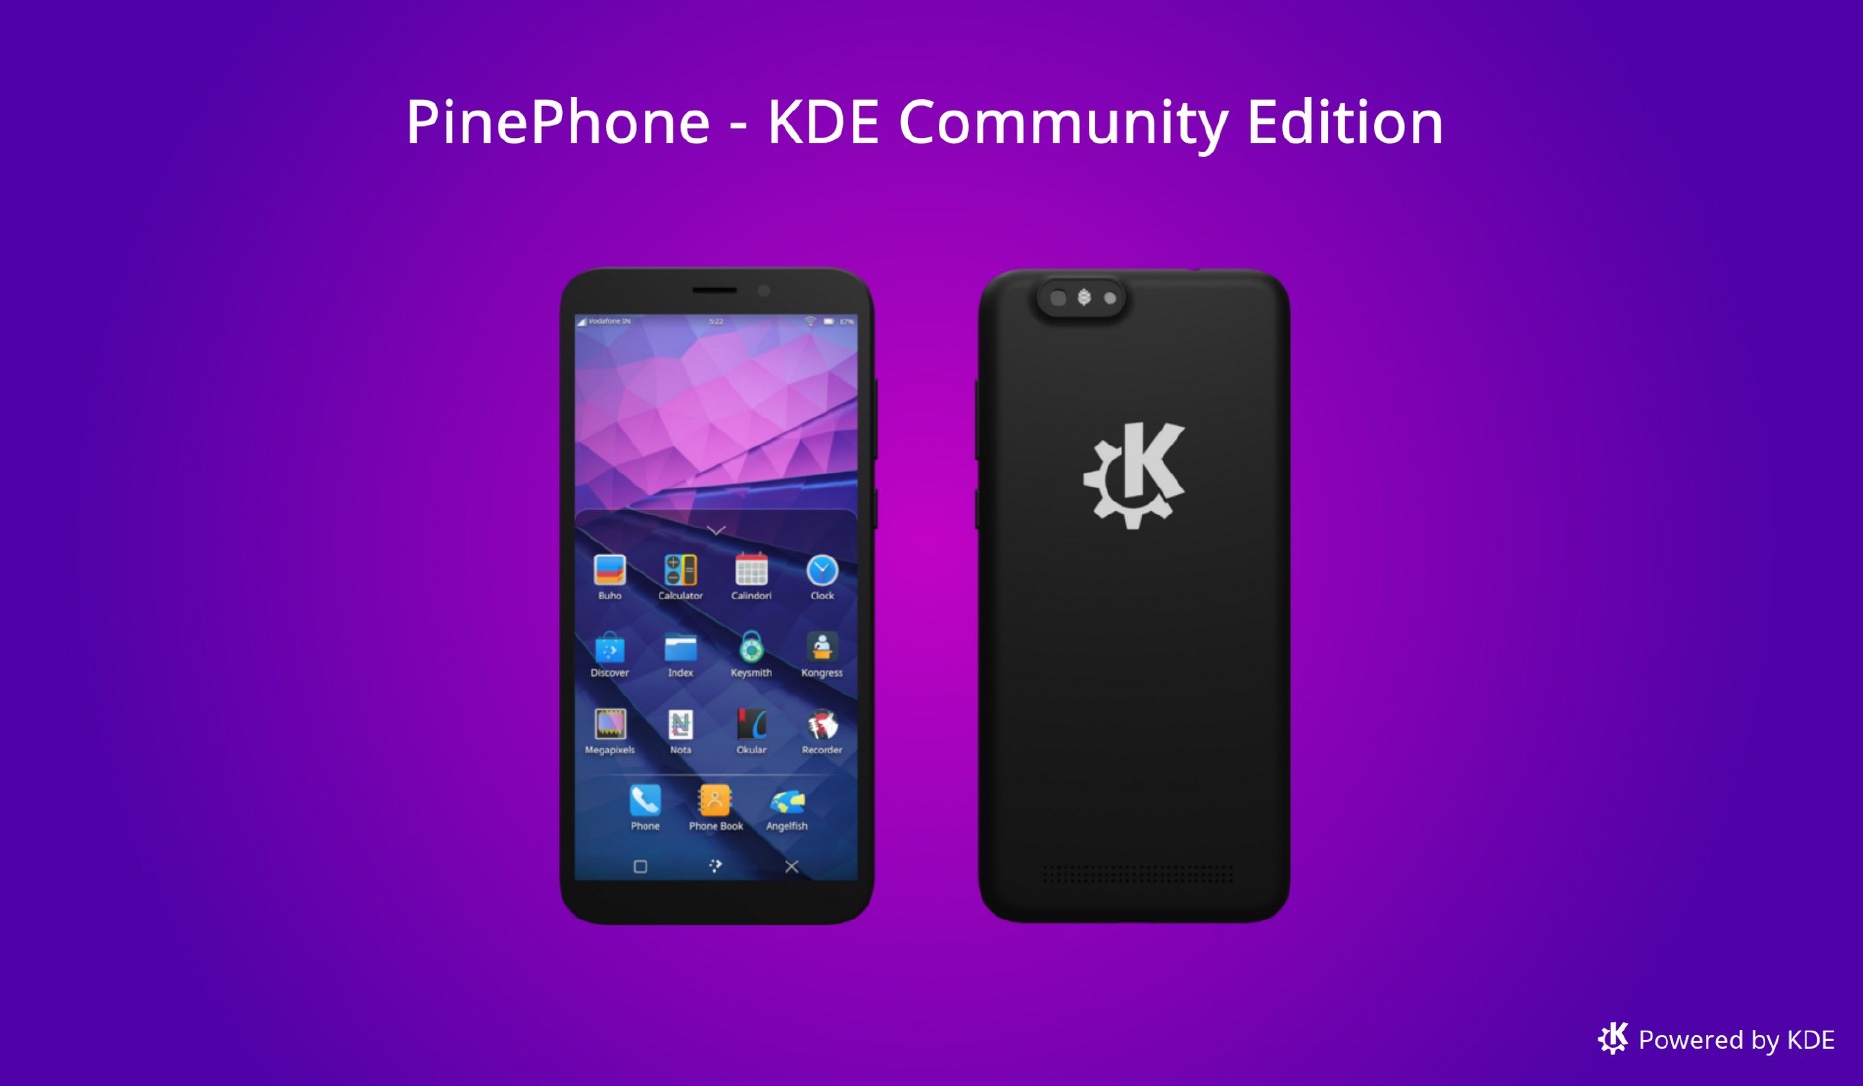 PinePhone KDE Community Edition Launches with Plasma Mobile UI, Convergence